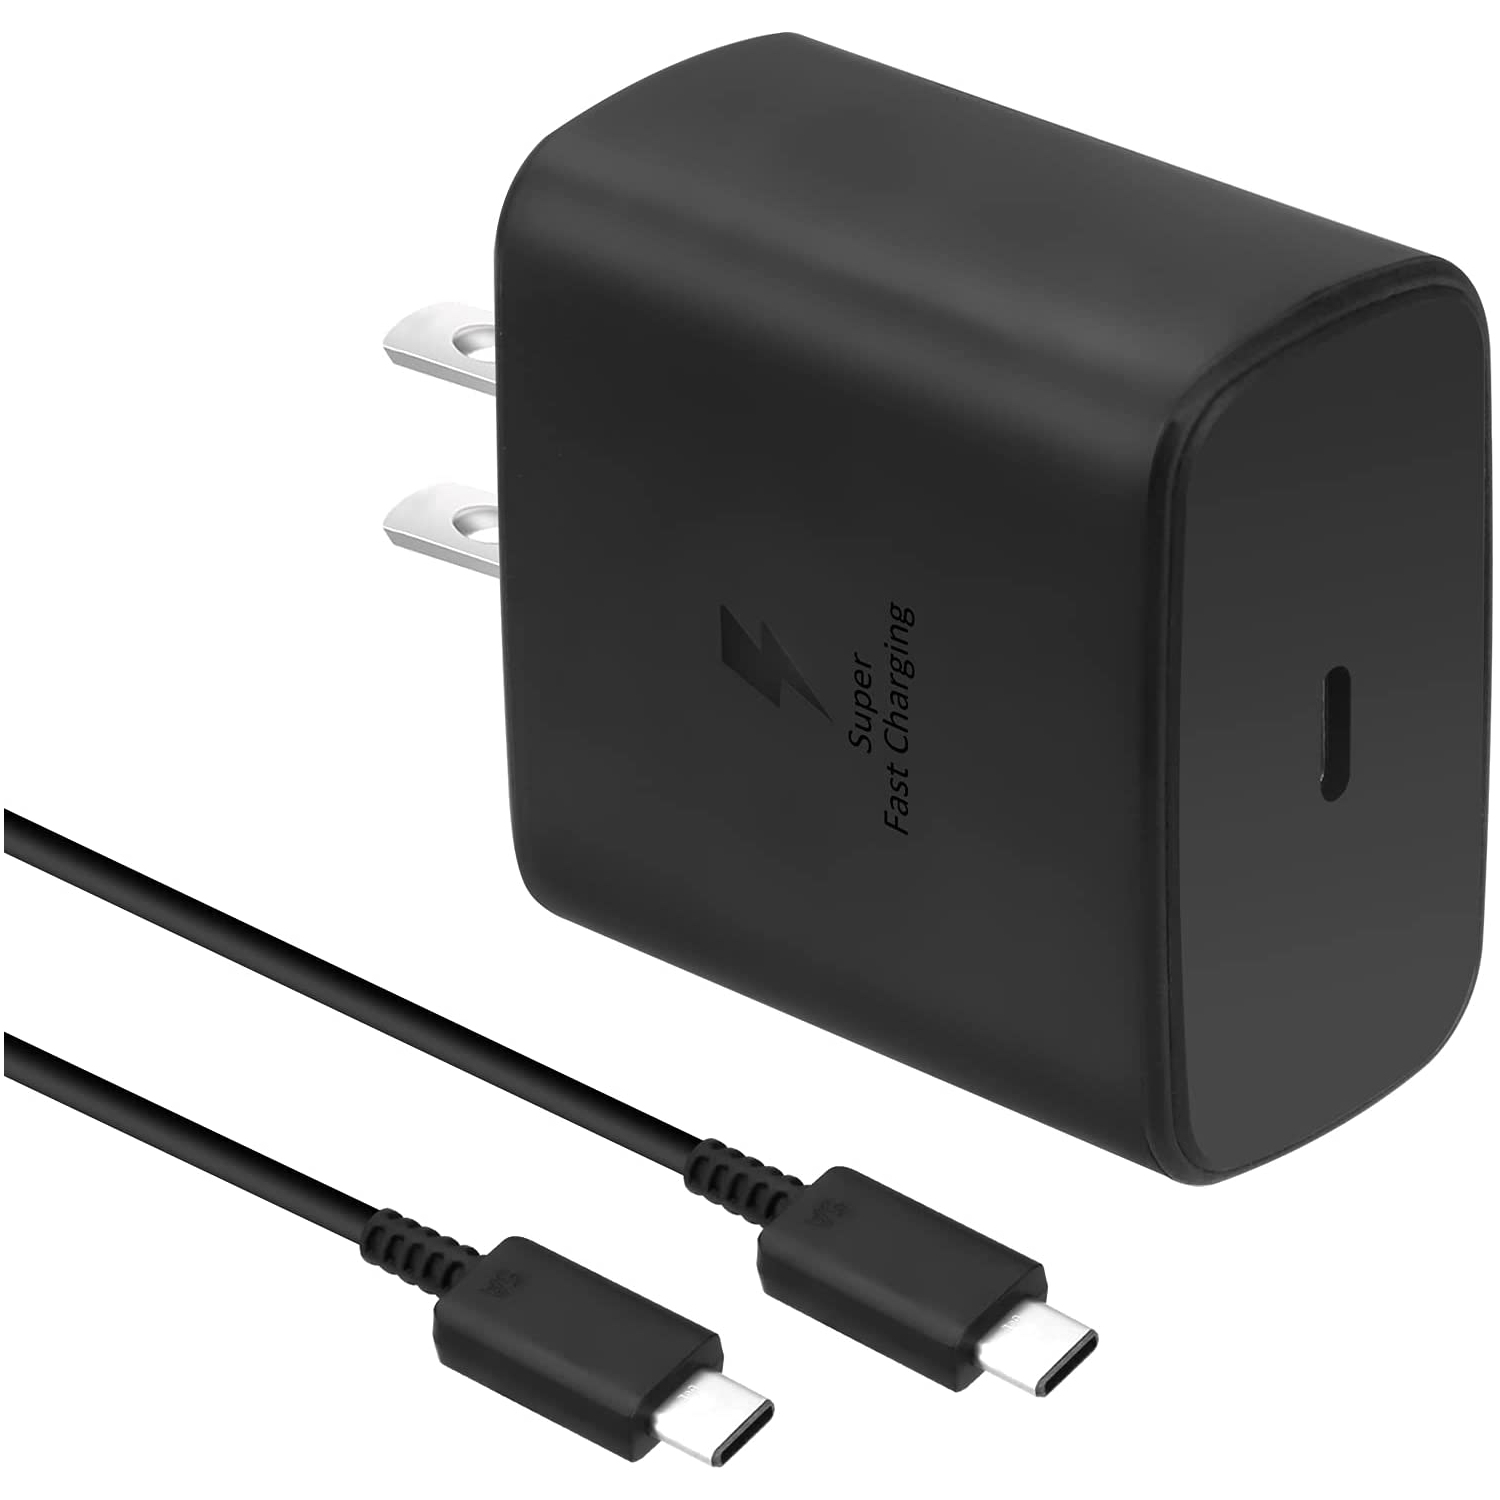 CABLESHARK 45W USB-C Super Fast Charging Wall Charger with 5Feet Type C-C Cable COMPATIBLE for Samsung Galaxy S21/Z Fold 2/Note 20 Ultra Note10/10+/S20 Ultra/S20 Plus/S20 5G/S10/S8/Note 10